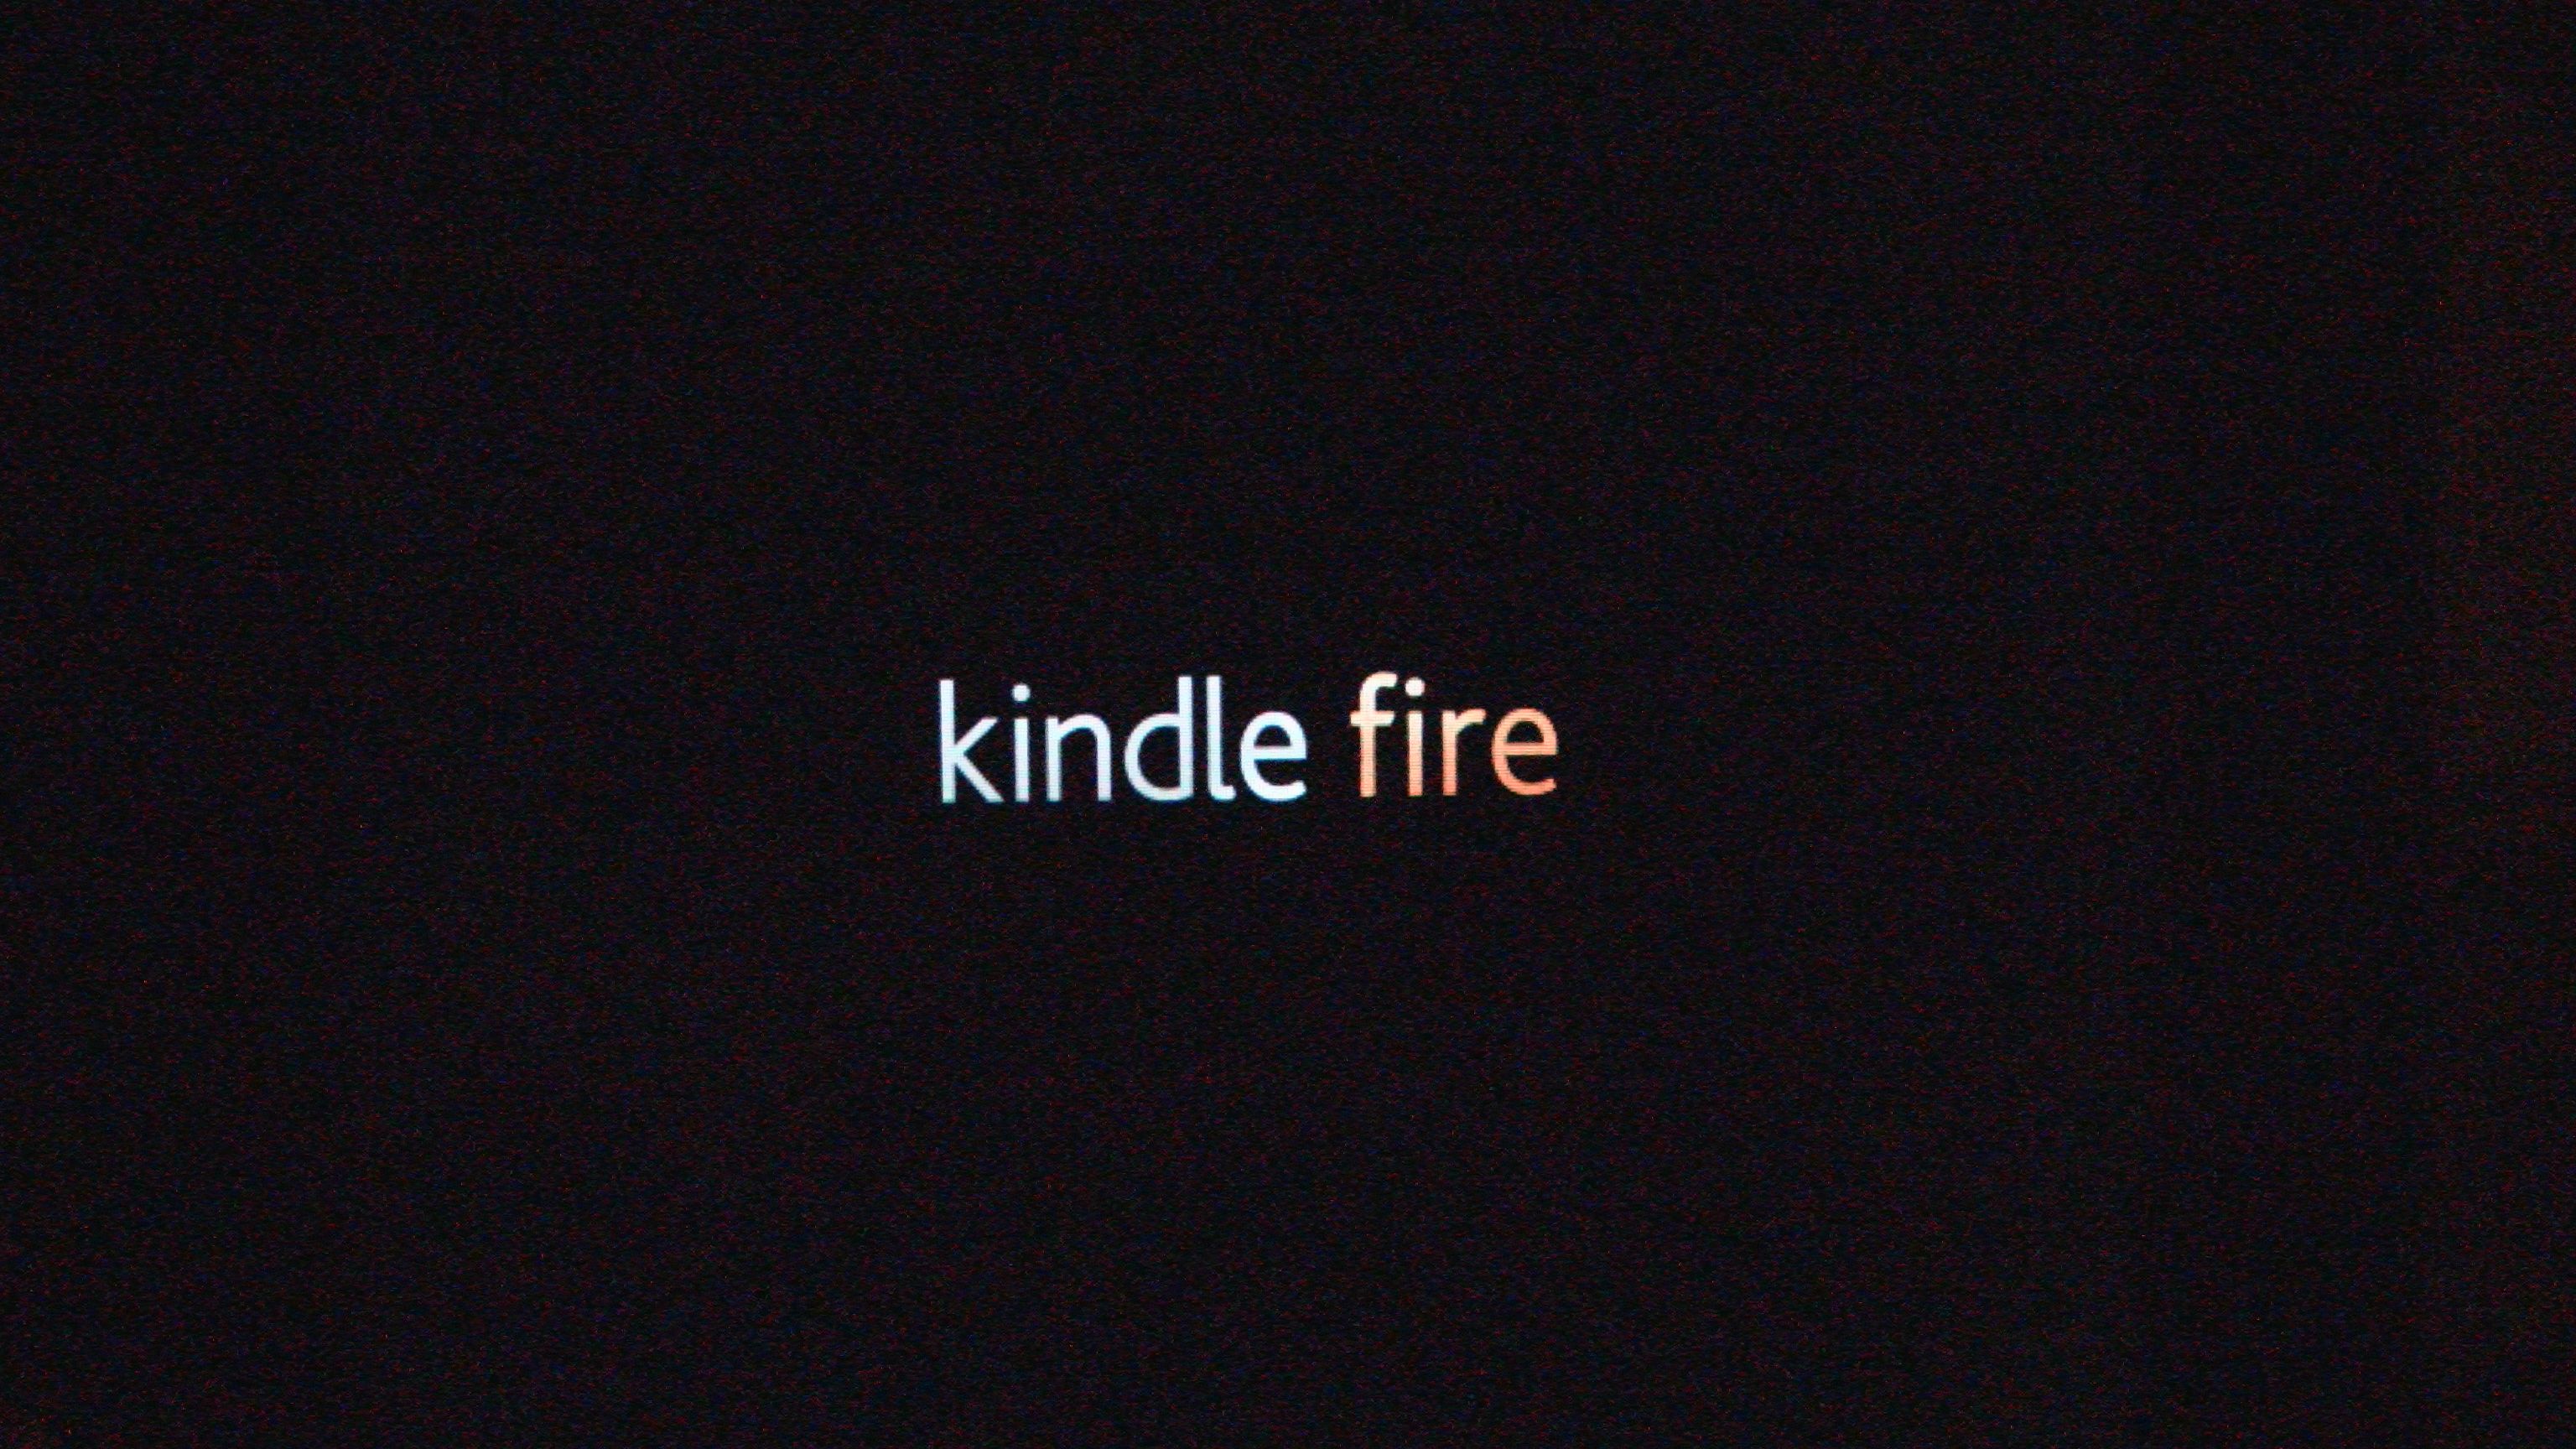 Free Download Amazons New Kindle Fire Tablet Is Hot Owner Review Booya Gadget 3072x1728 For Your Desktop Mobile Tablet Explore 46 Kindle Fire Hd Wallpaper Change App Kindle Fire